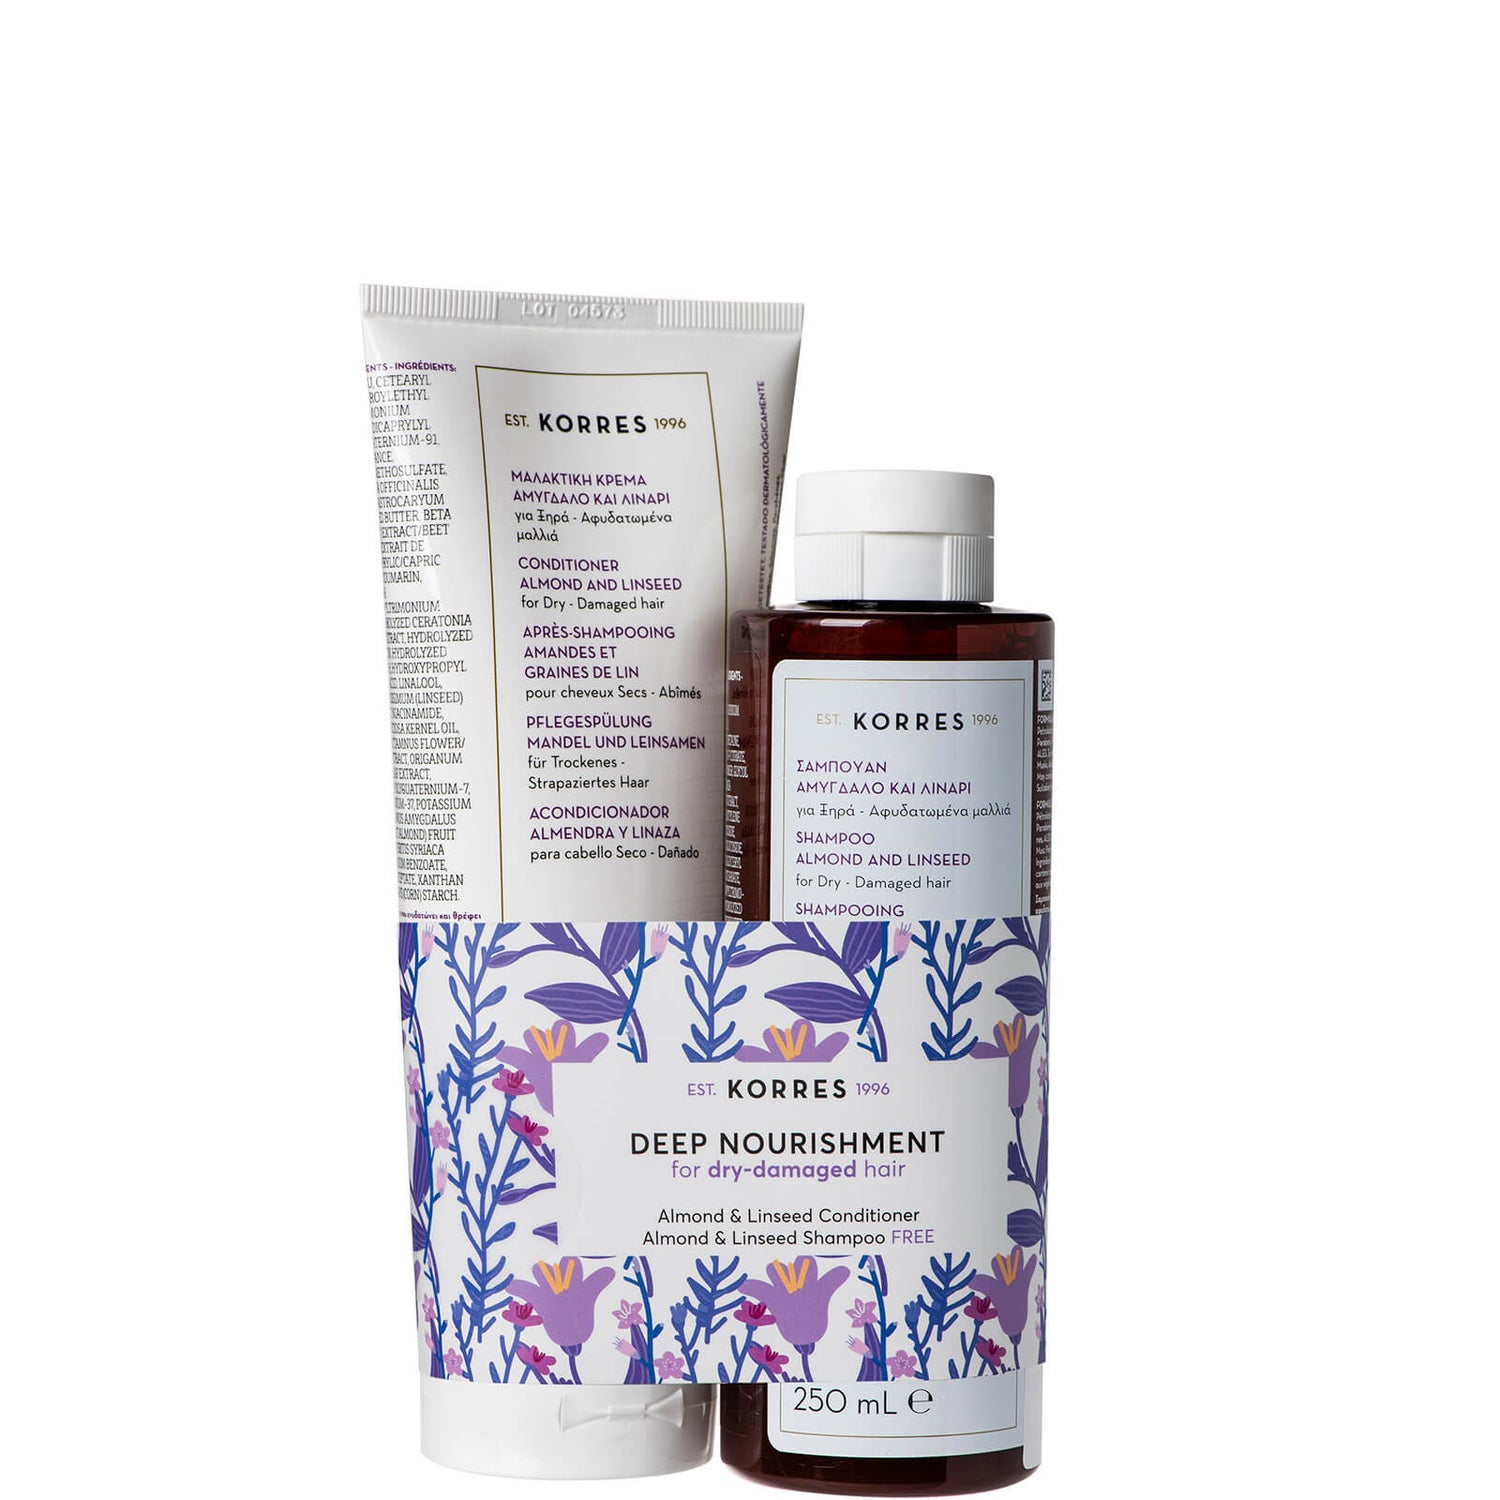 KORRES Almond & Linseed Kit Conditioner and Shampoo Duo